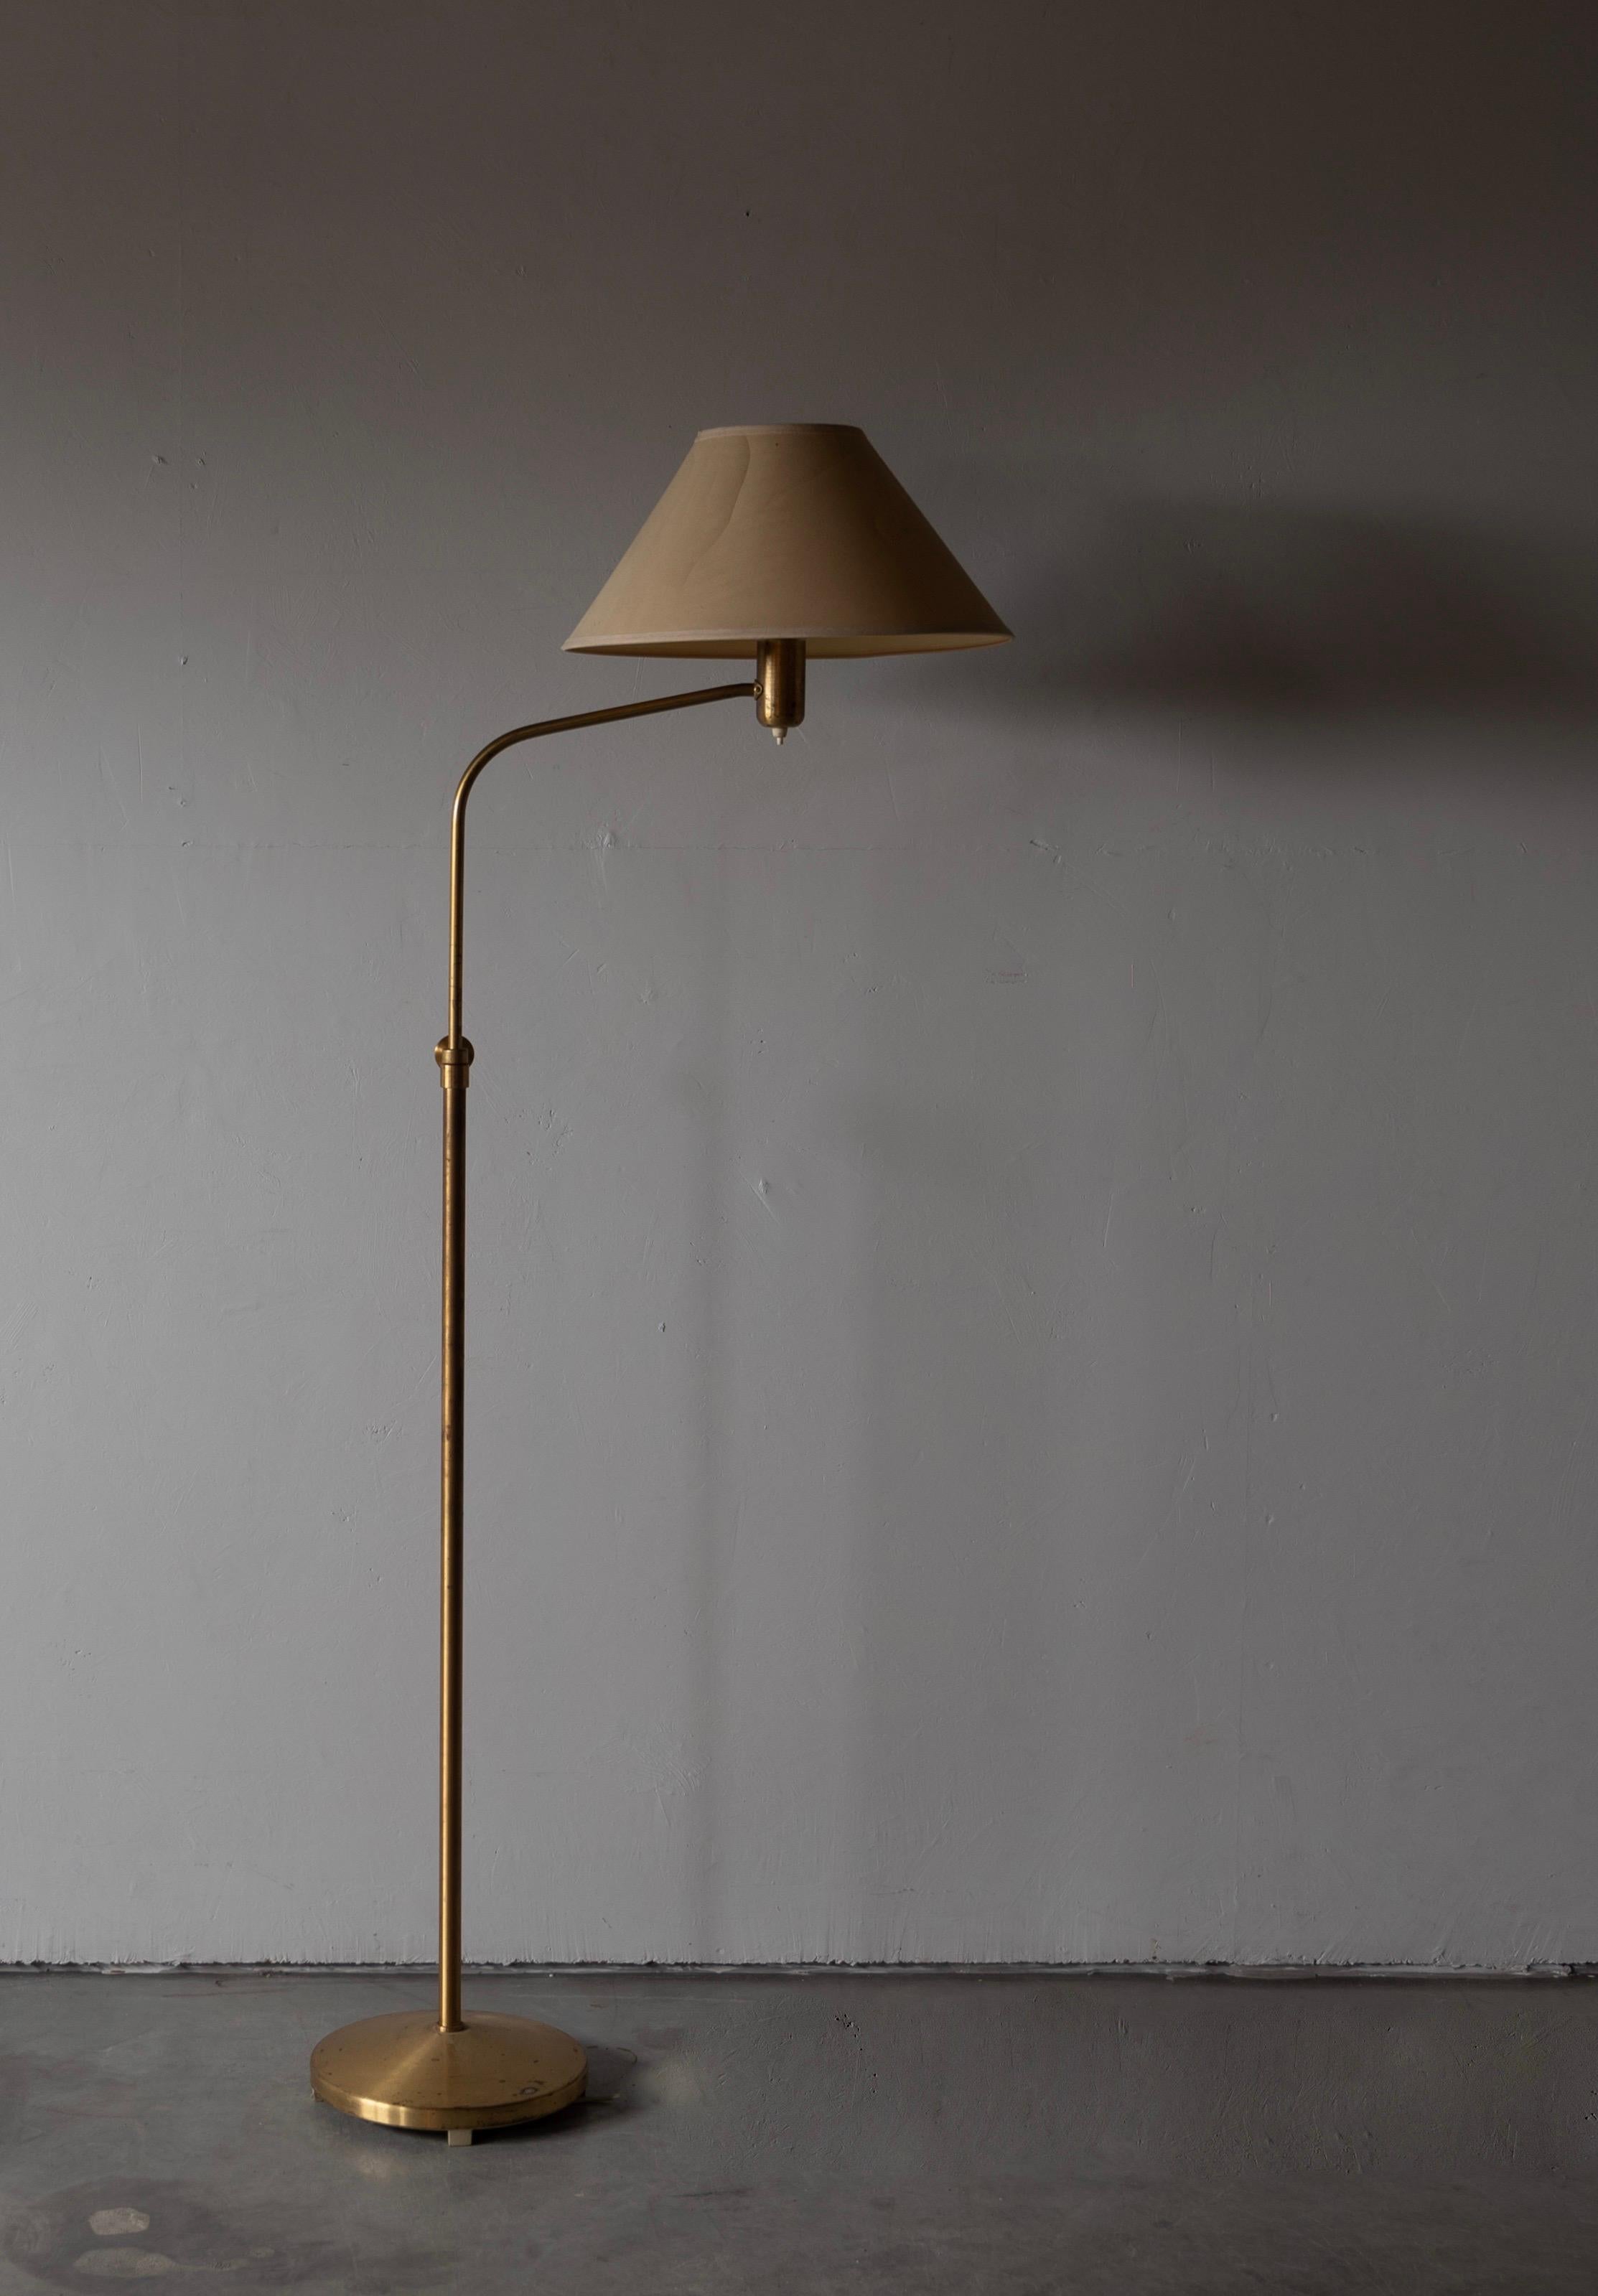 A floor lamp. Designed and produced by Bergboms, Sweden, c. 1970s.

Other designers of the period include Paavo Tynell, Hans Bergström, Josef Frank, and Kaare Klint.